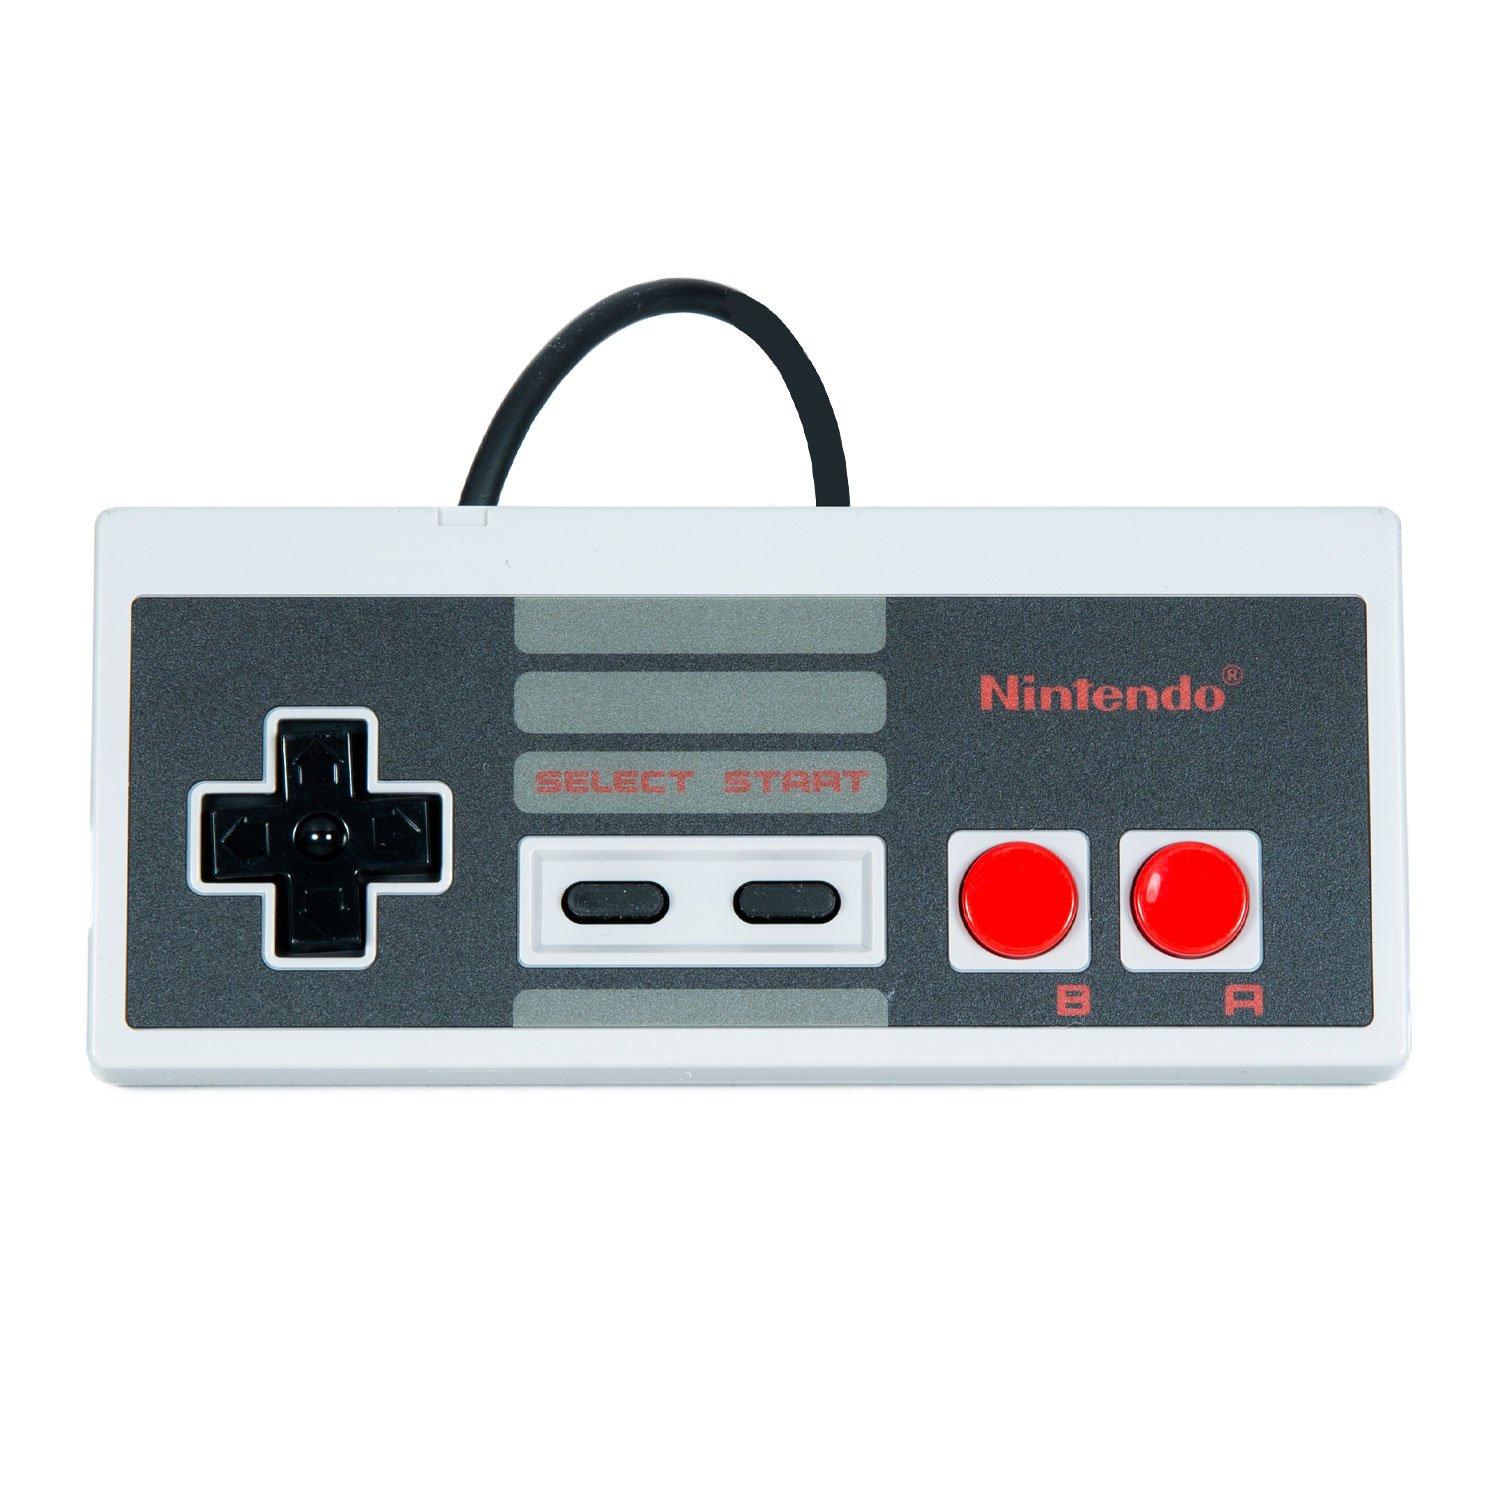 Nintendo NES Classic Edition Controller | The Market Place